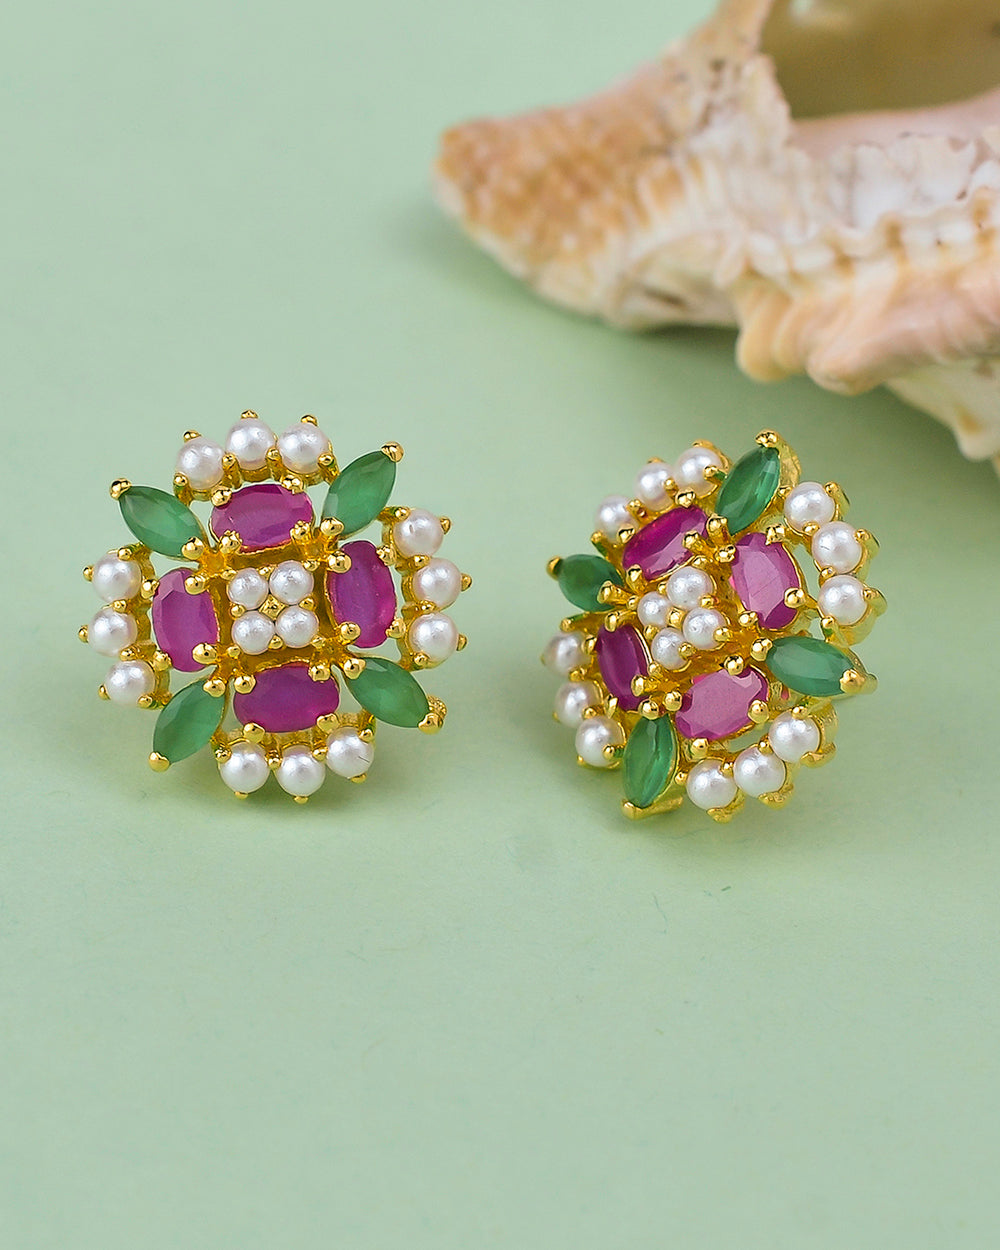 Women's White Pearl Beaded Pink And Green Cz Stud Earrings - Voylla